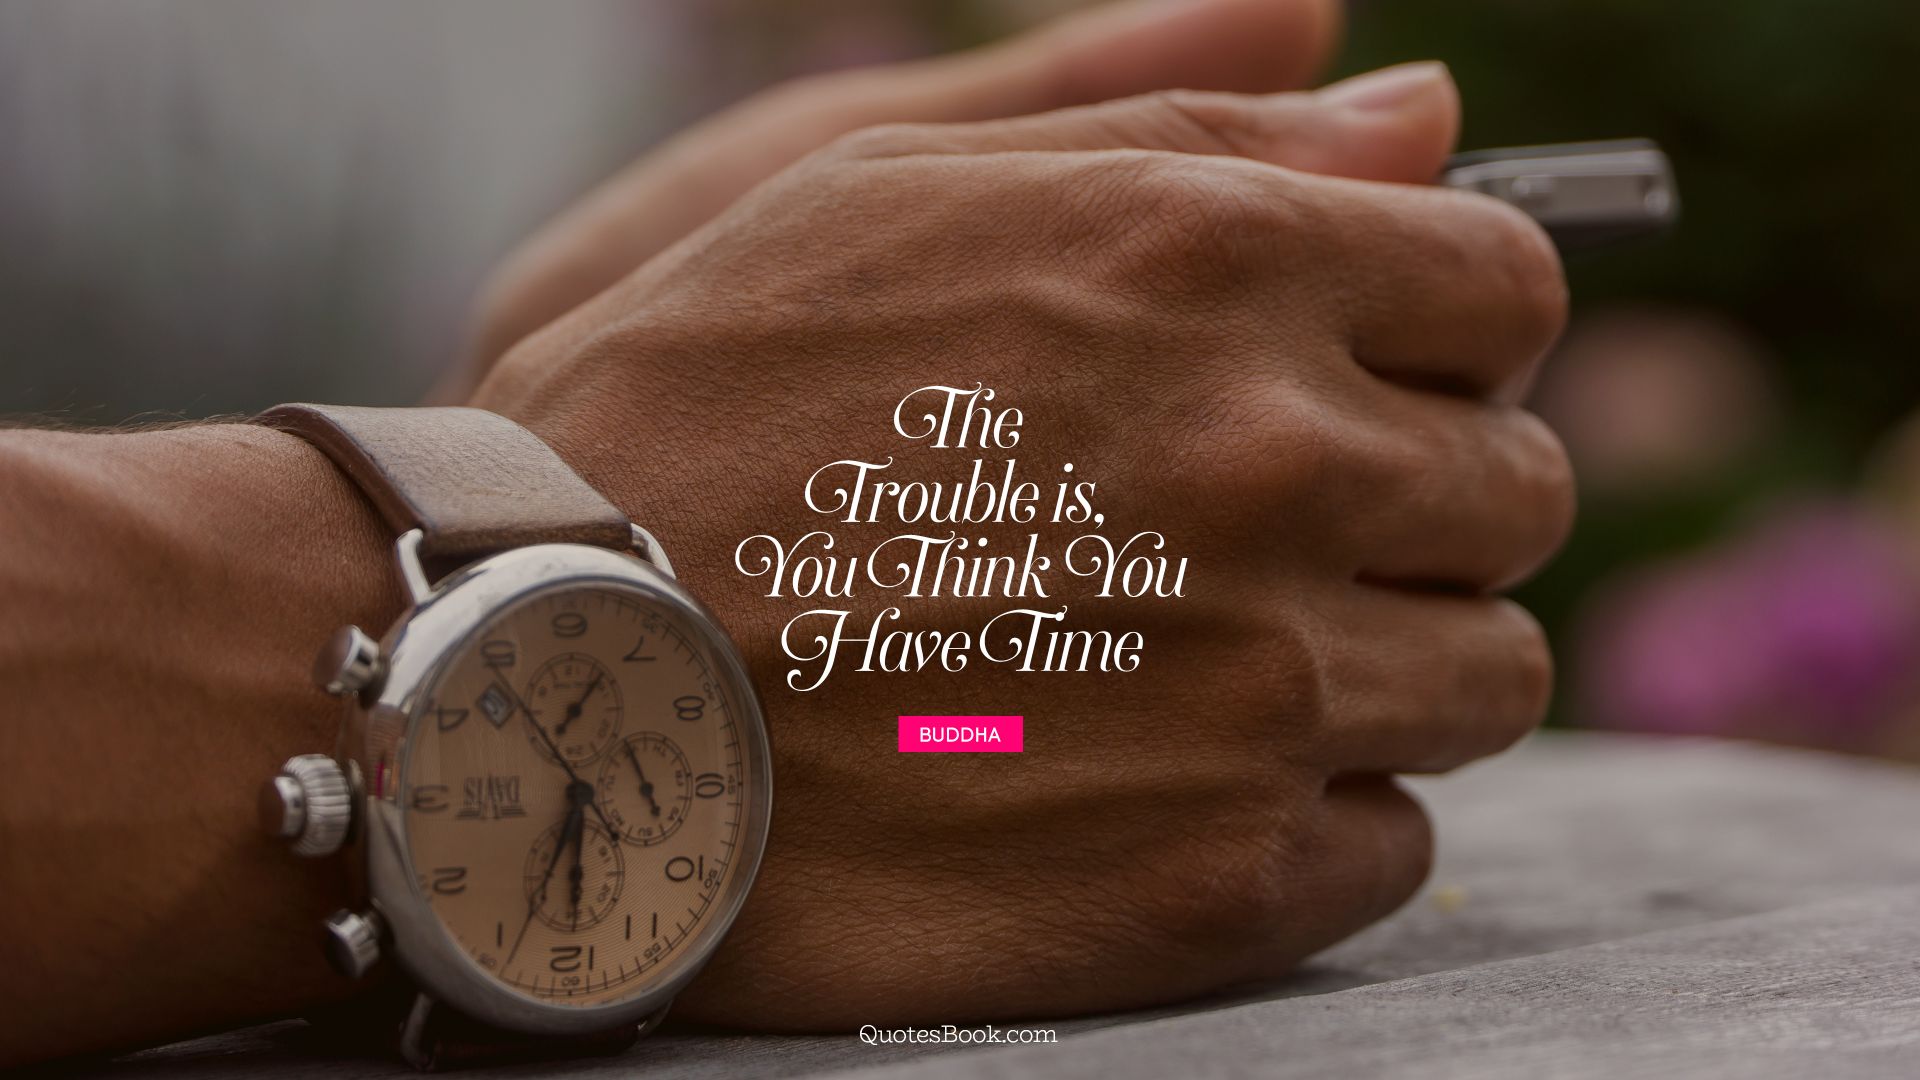 The trouble is, you think you have time. - Quote by Buddha